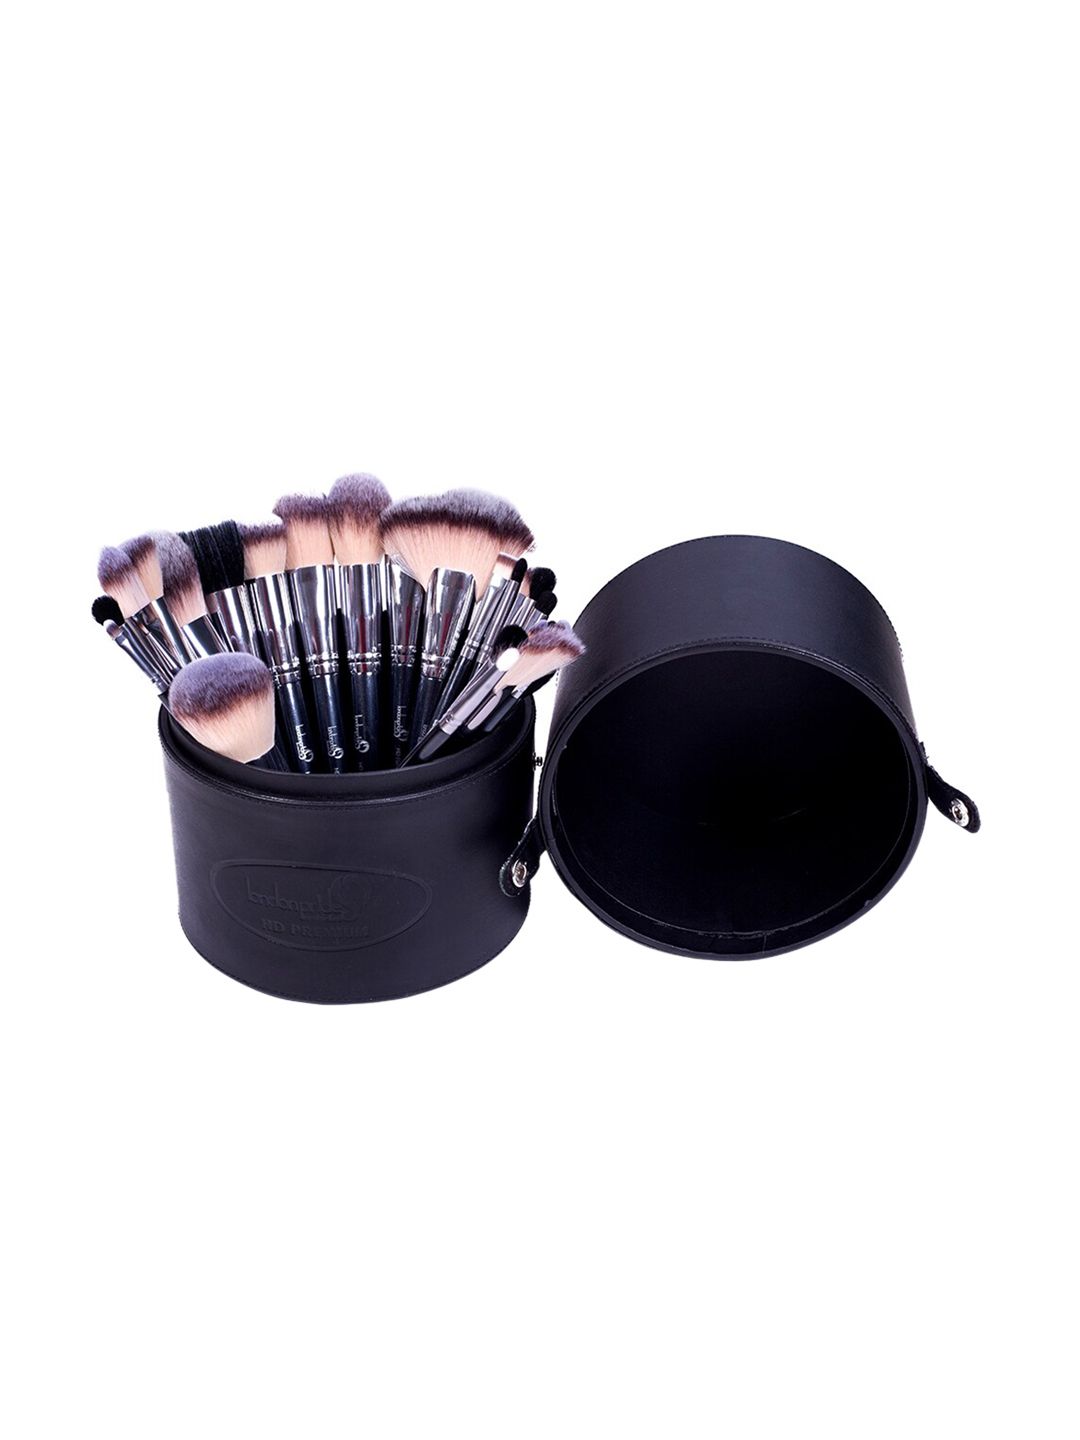 london pride cosmetics Set of 24 HD Professional Makeup Brushes Price in India